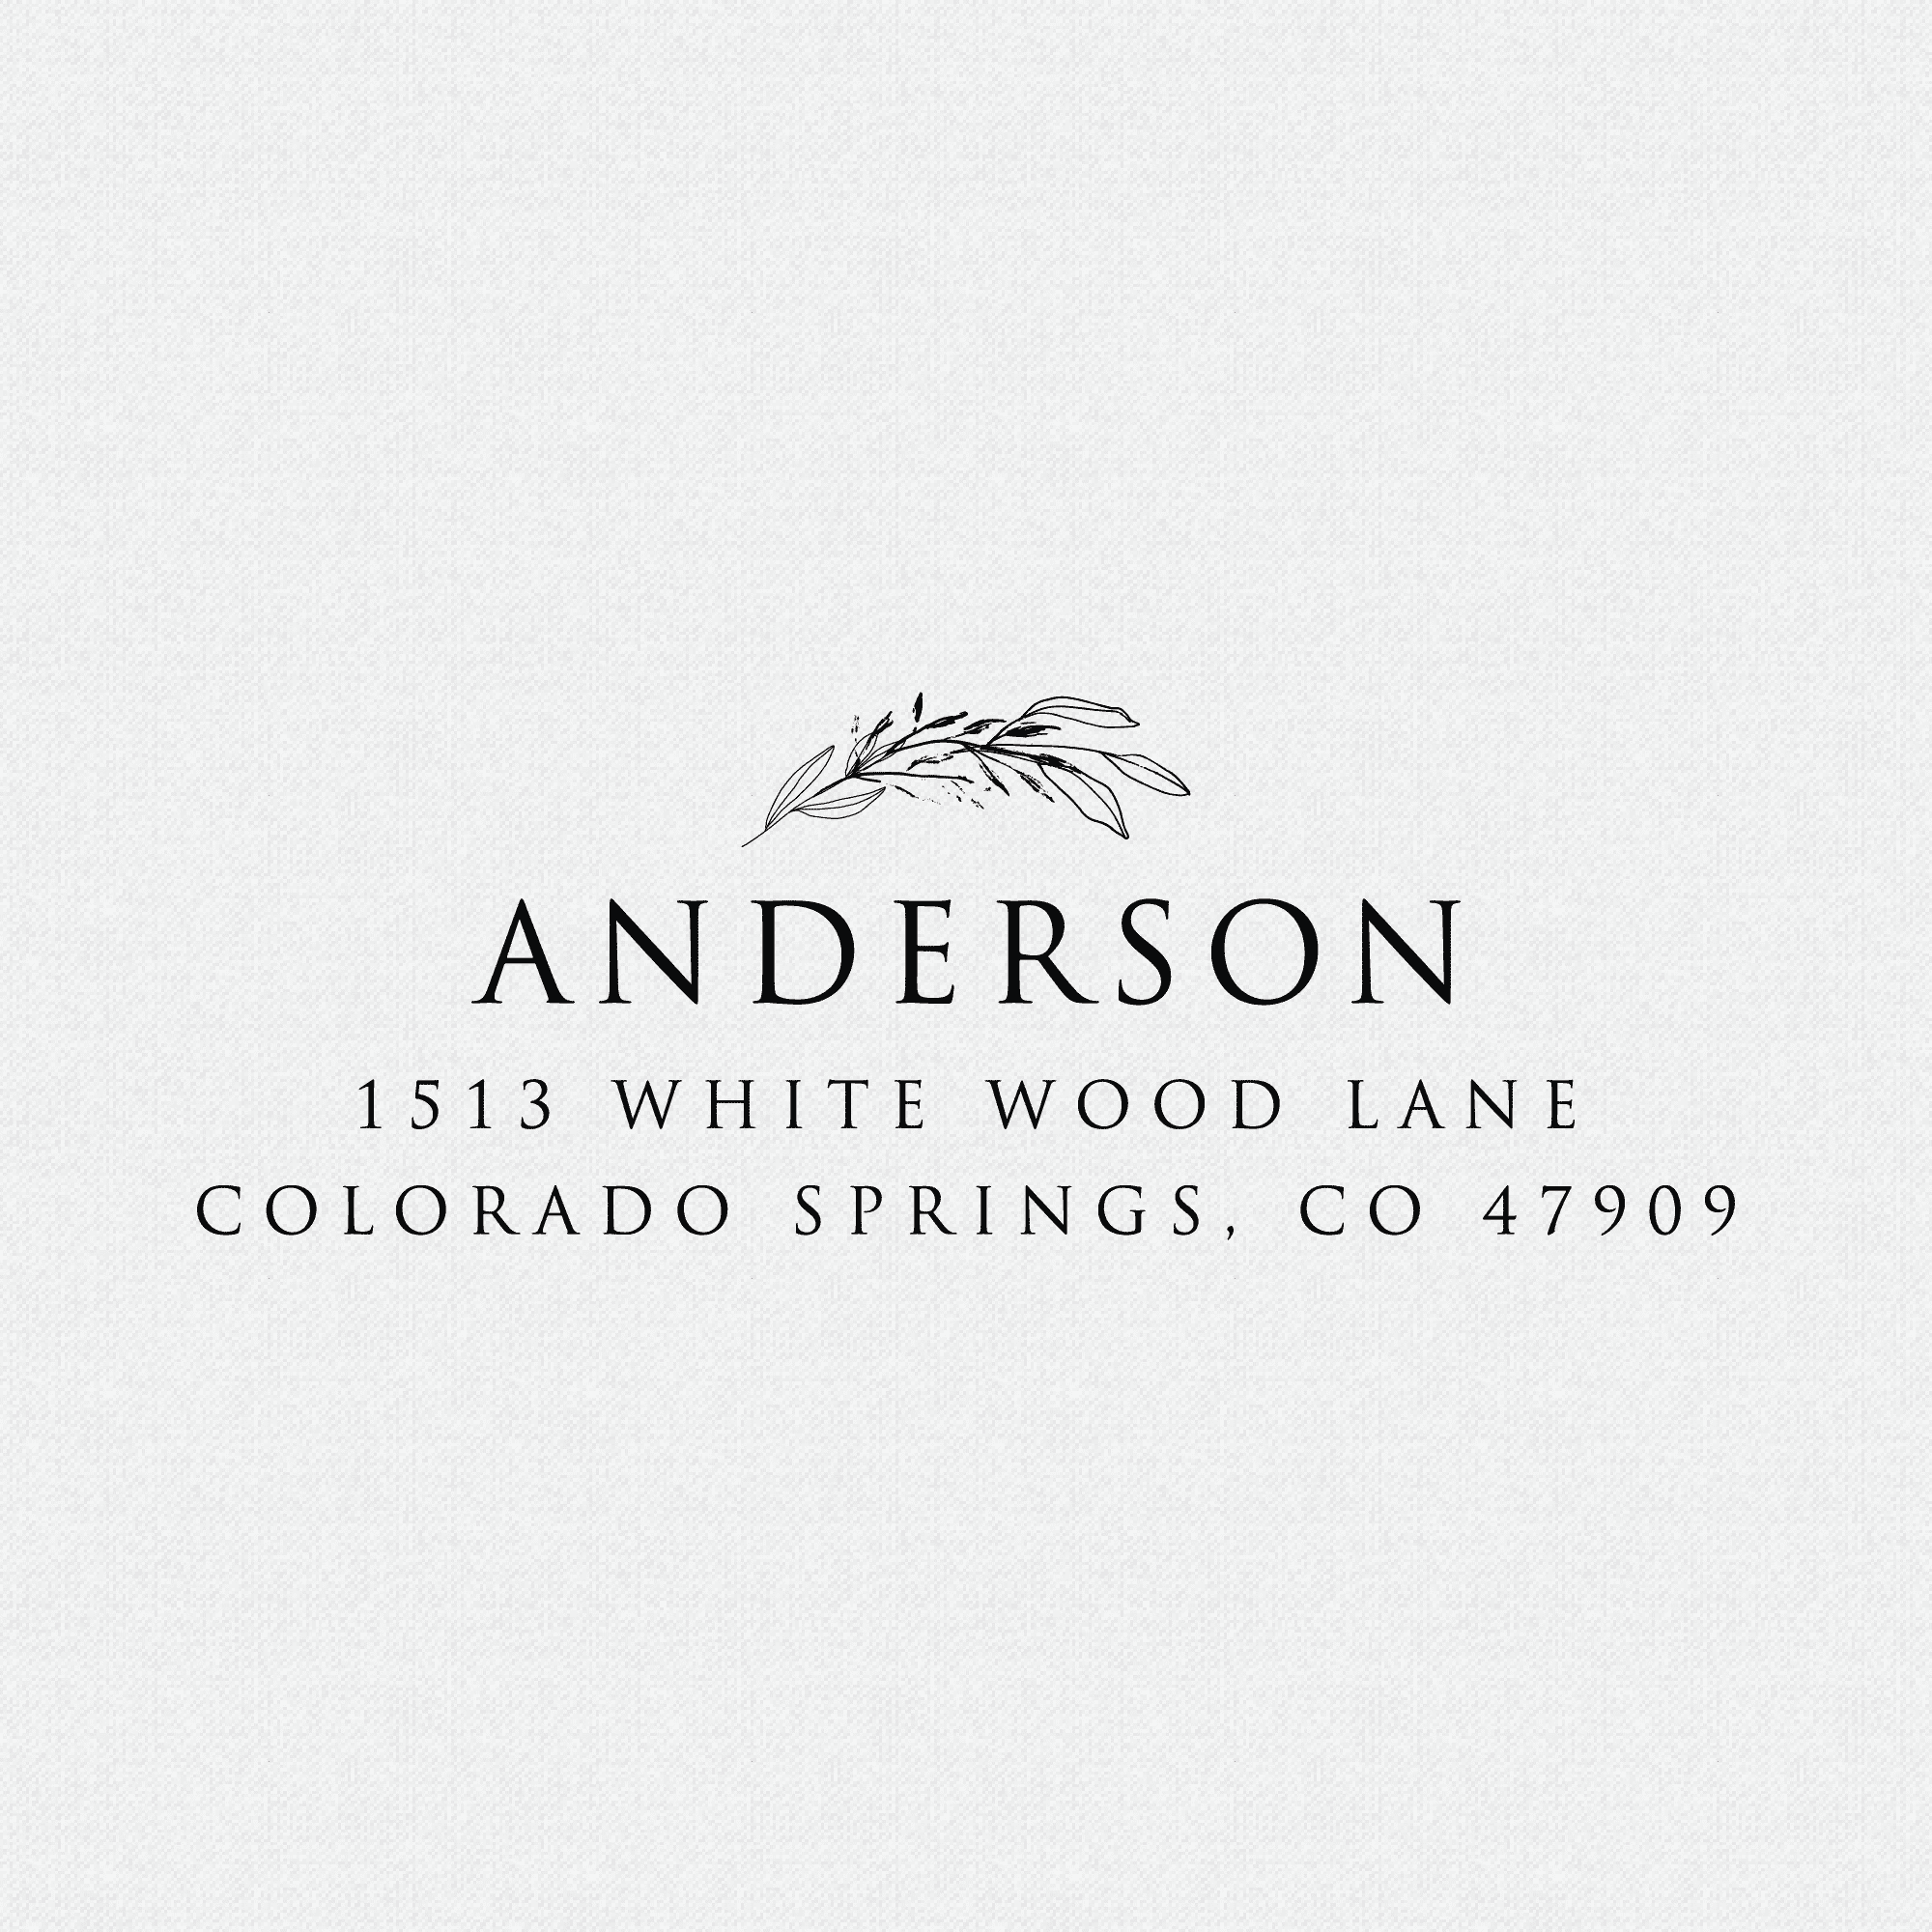 Return Address Stamp in Serif Print Font with Floral Motif for Wedding Invitations - Style T#930